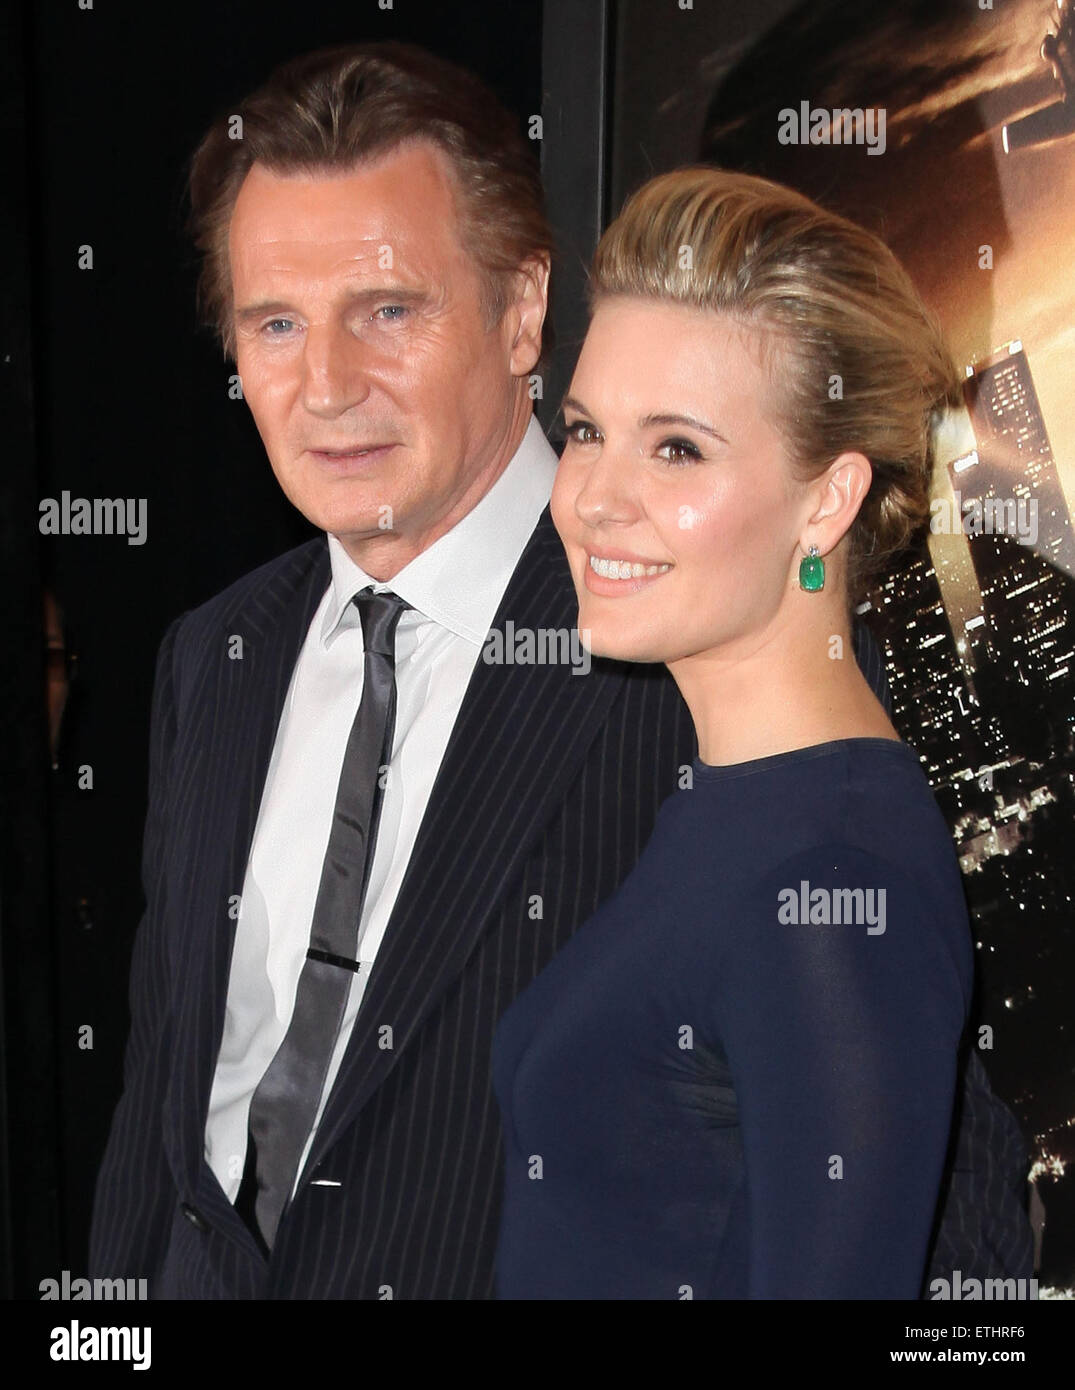 'Taken 3' fan event screening at AMC Empire 25 theater - Arrivals  Featuring: Liam Neeson, Maggie Grace Where: New York City, New York, United States When: 07 Jan 2015 Credit: PNP/WENN.com Stock Photo